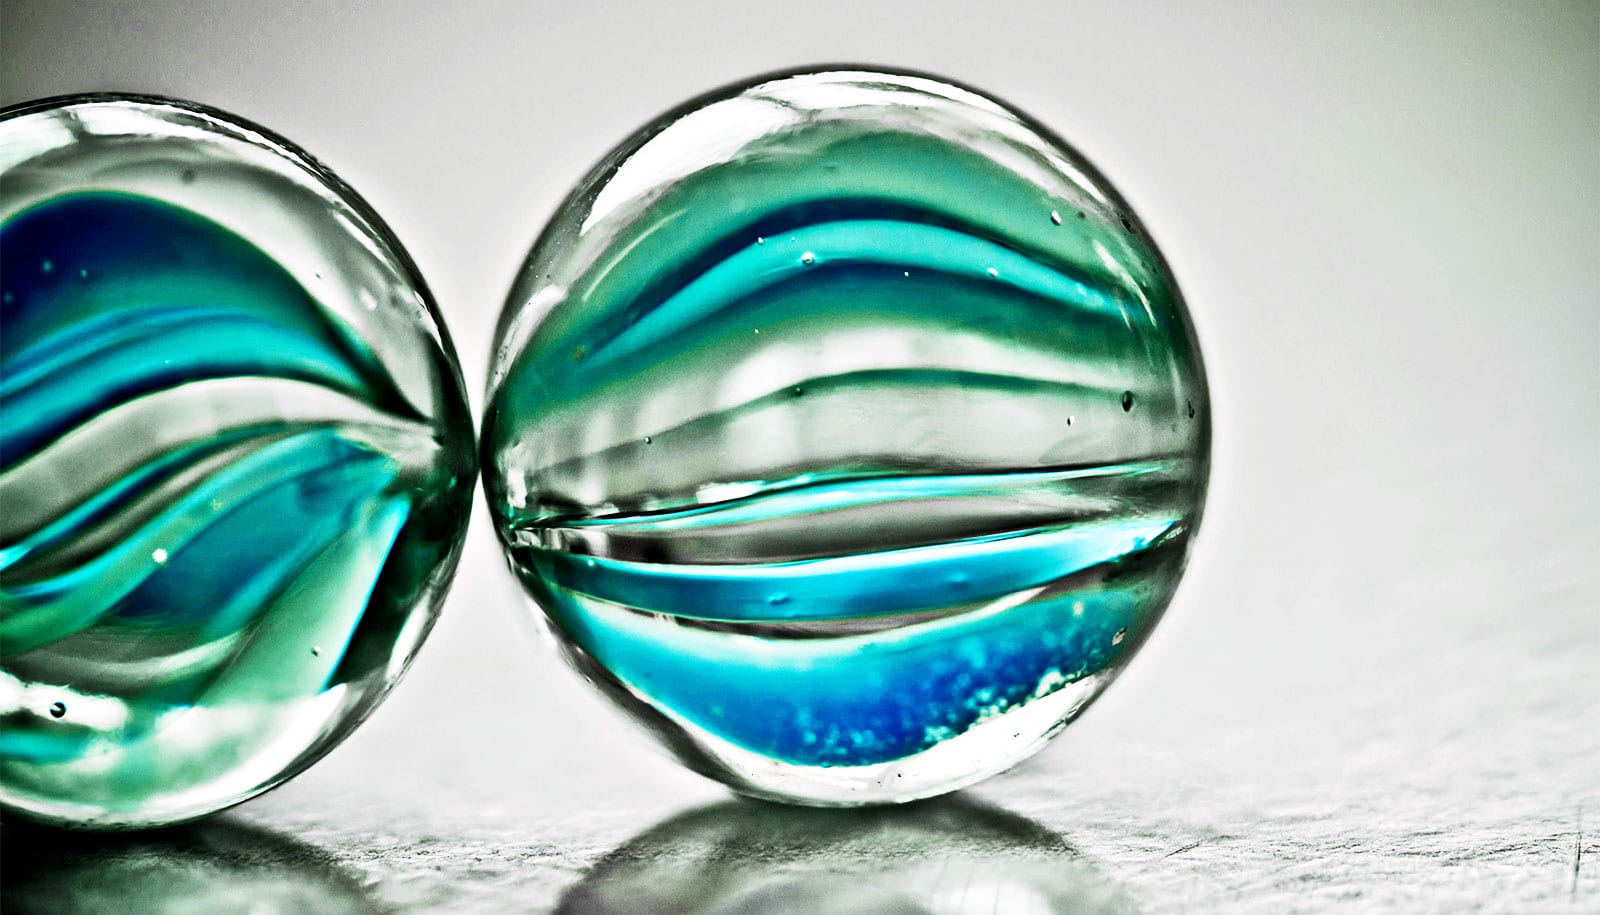 Two glass marbles on a metallic surface.